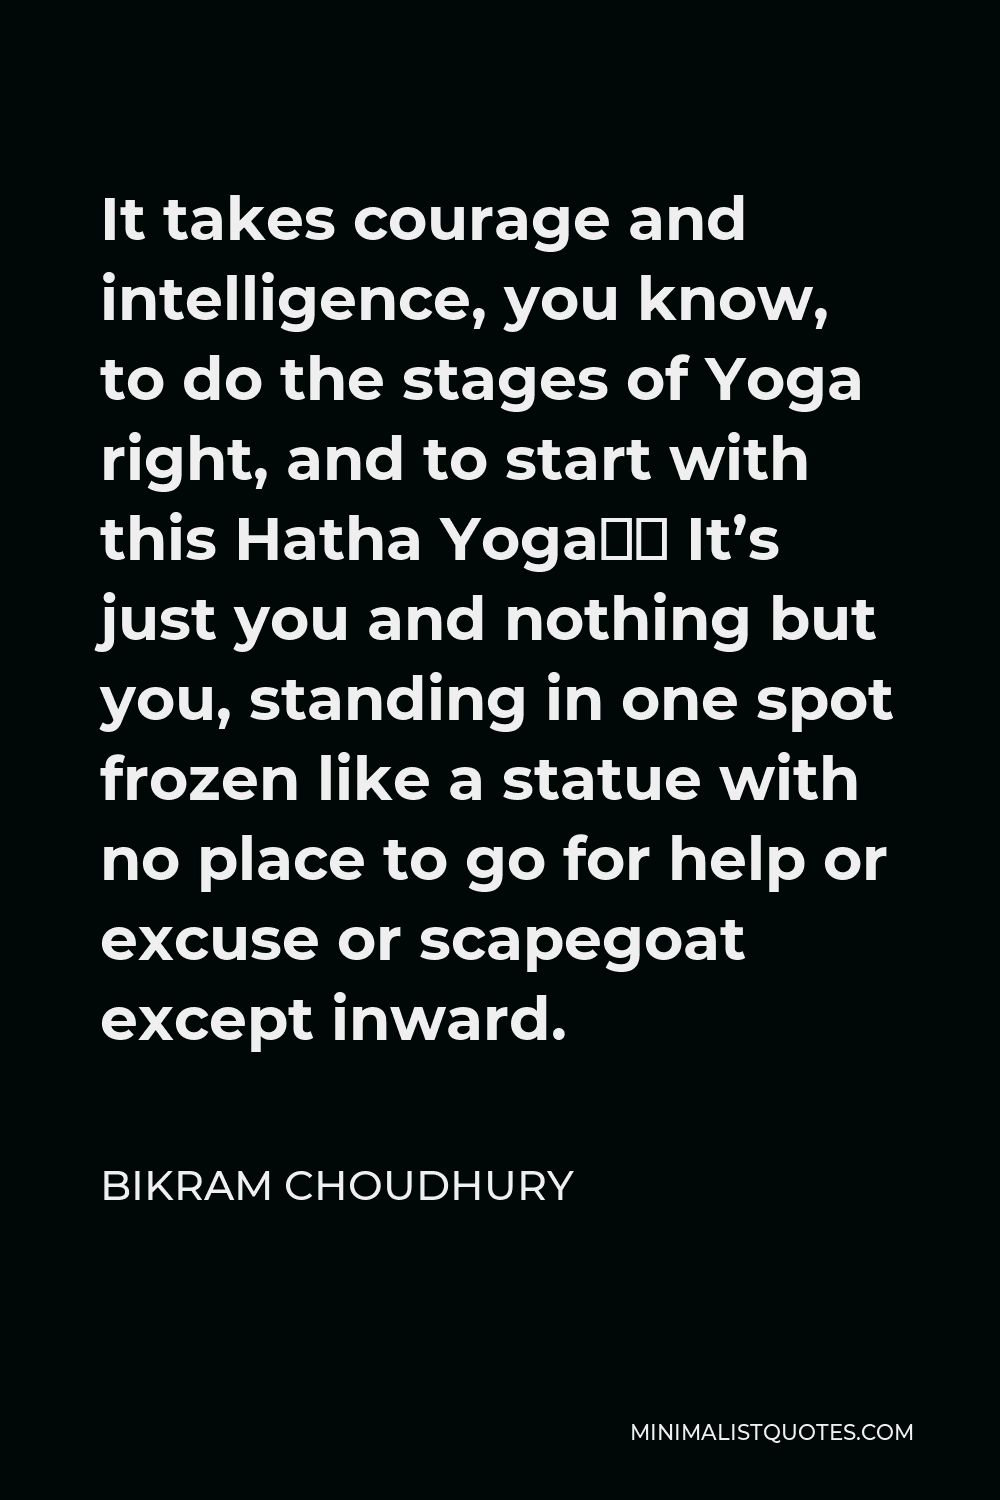 Bikram Choudhury Quote - It takes courage and intelligence, you know, to do the stages of Yoga right, and to start with this Hatha Yoga… It’s just you and nothing but you, standing in one spot frozen like a statue with no place to go for help or excuse or scapegoat except inward.